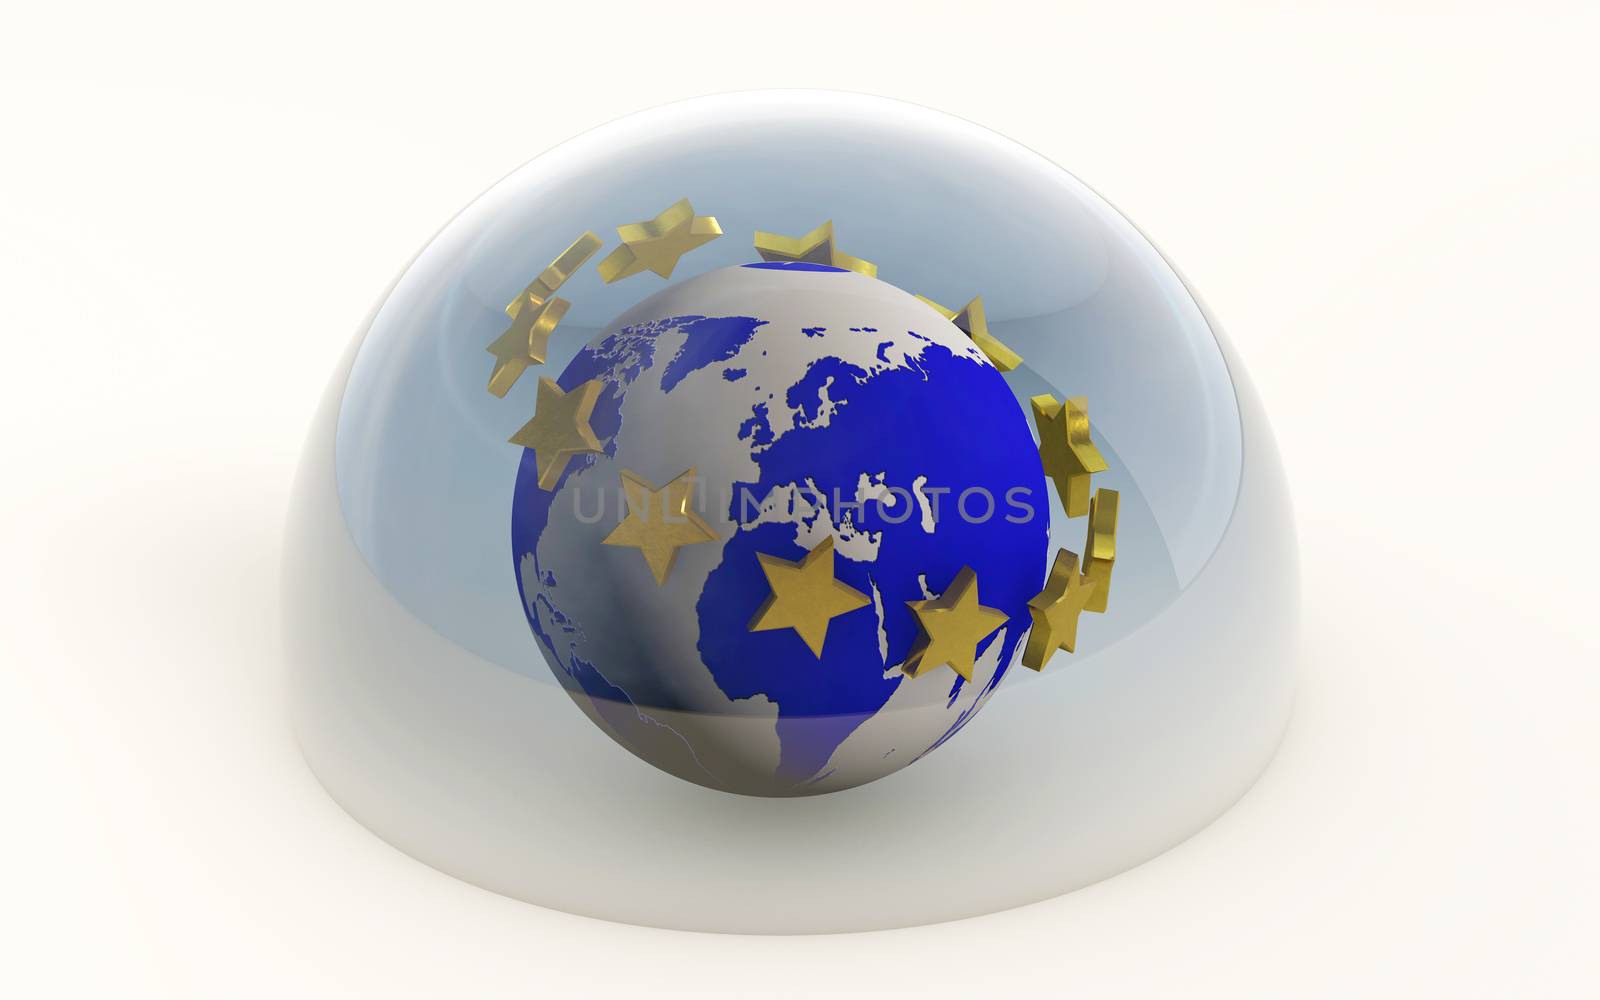 3d rendering of the european union with gold stars protected under a glass dome isolated on white